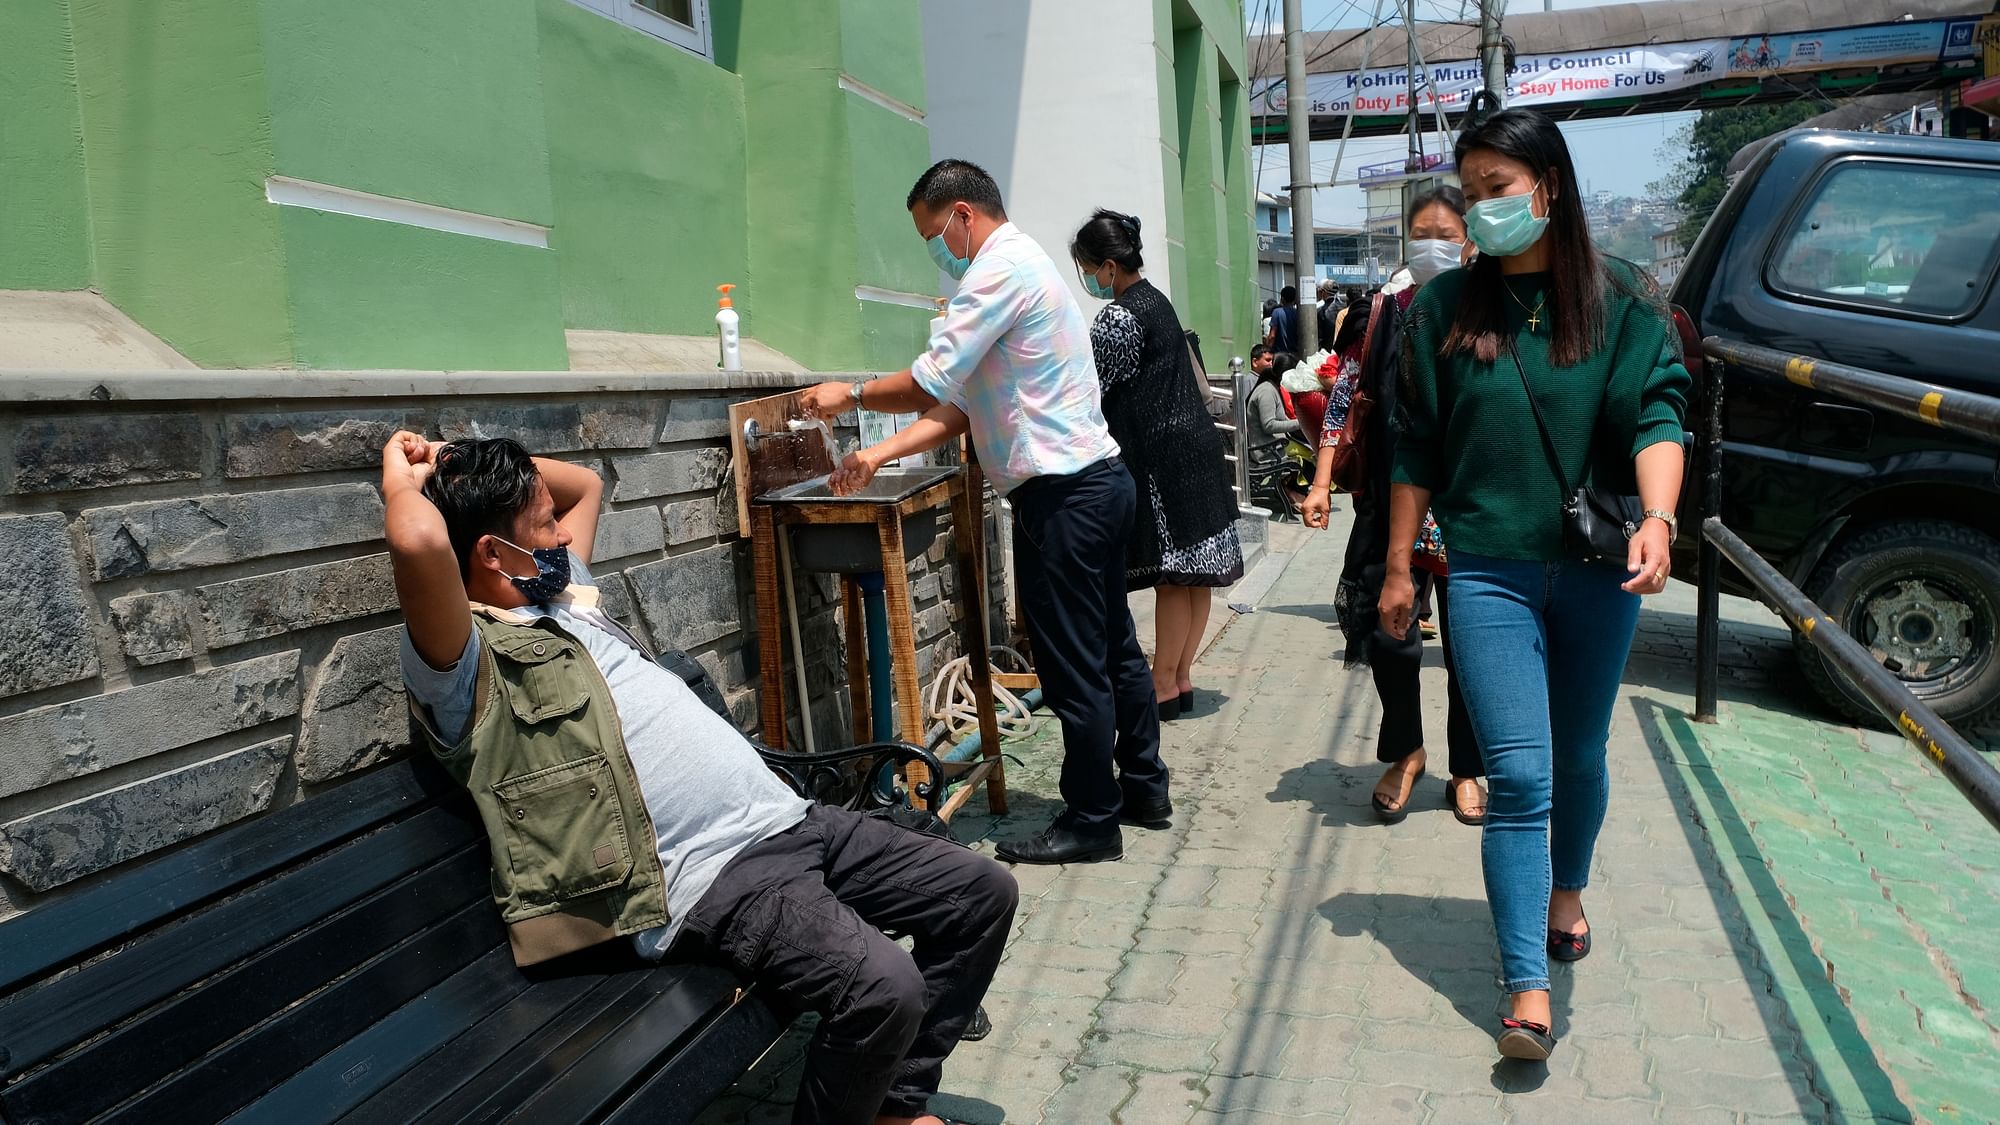 A man rests on a bench as pedestrian wash their hands at hand basins set up by the entrance of Oking Hospital in Kohima, capital of the northeastern Indian state of Nagaland, Monday, April 13, 202